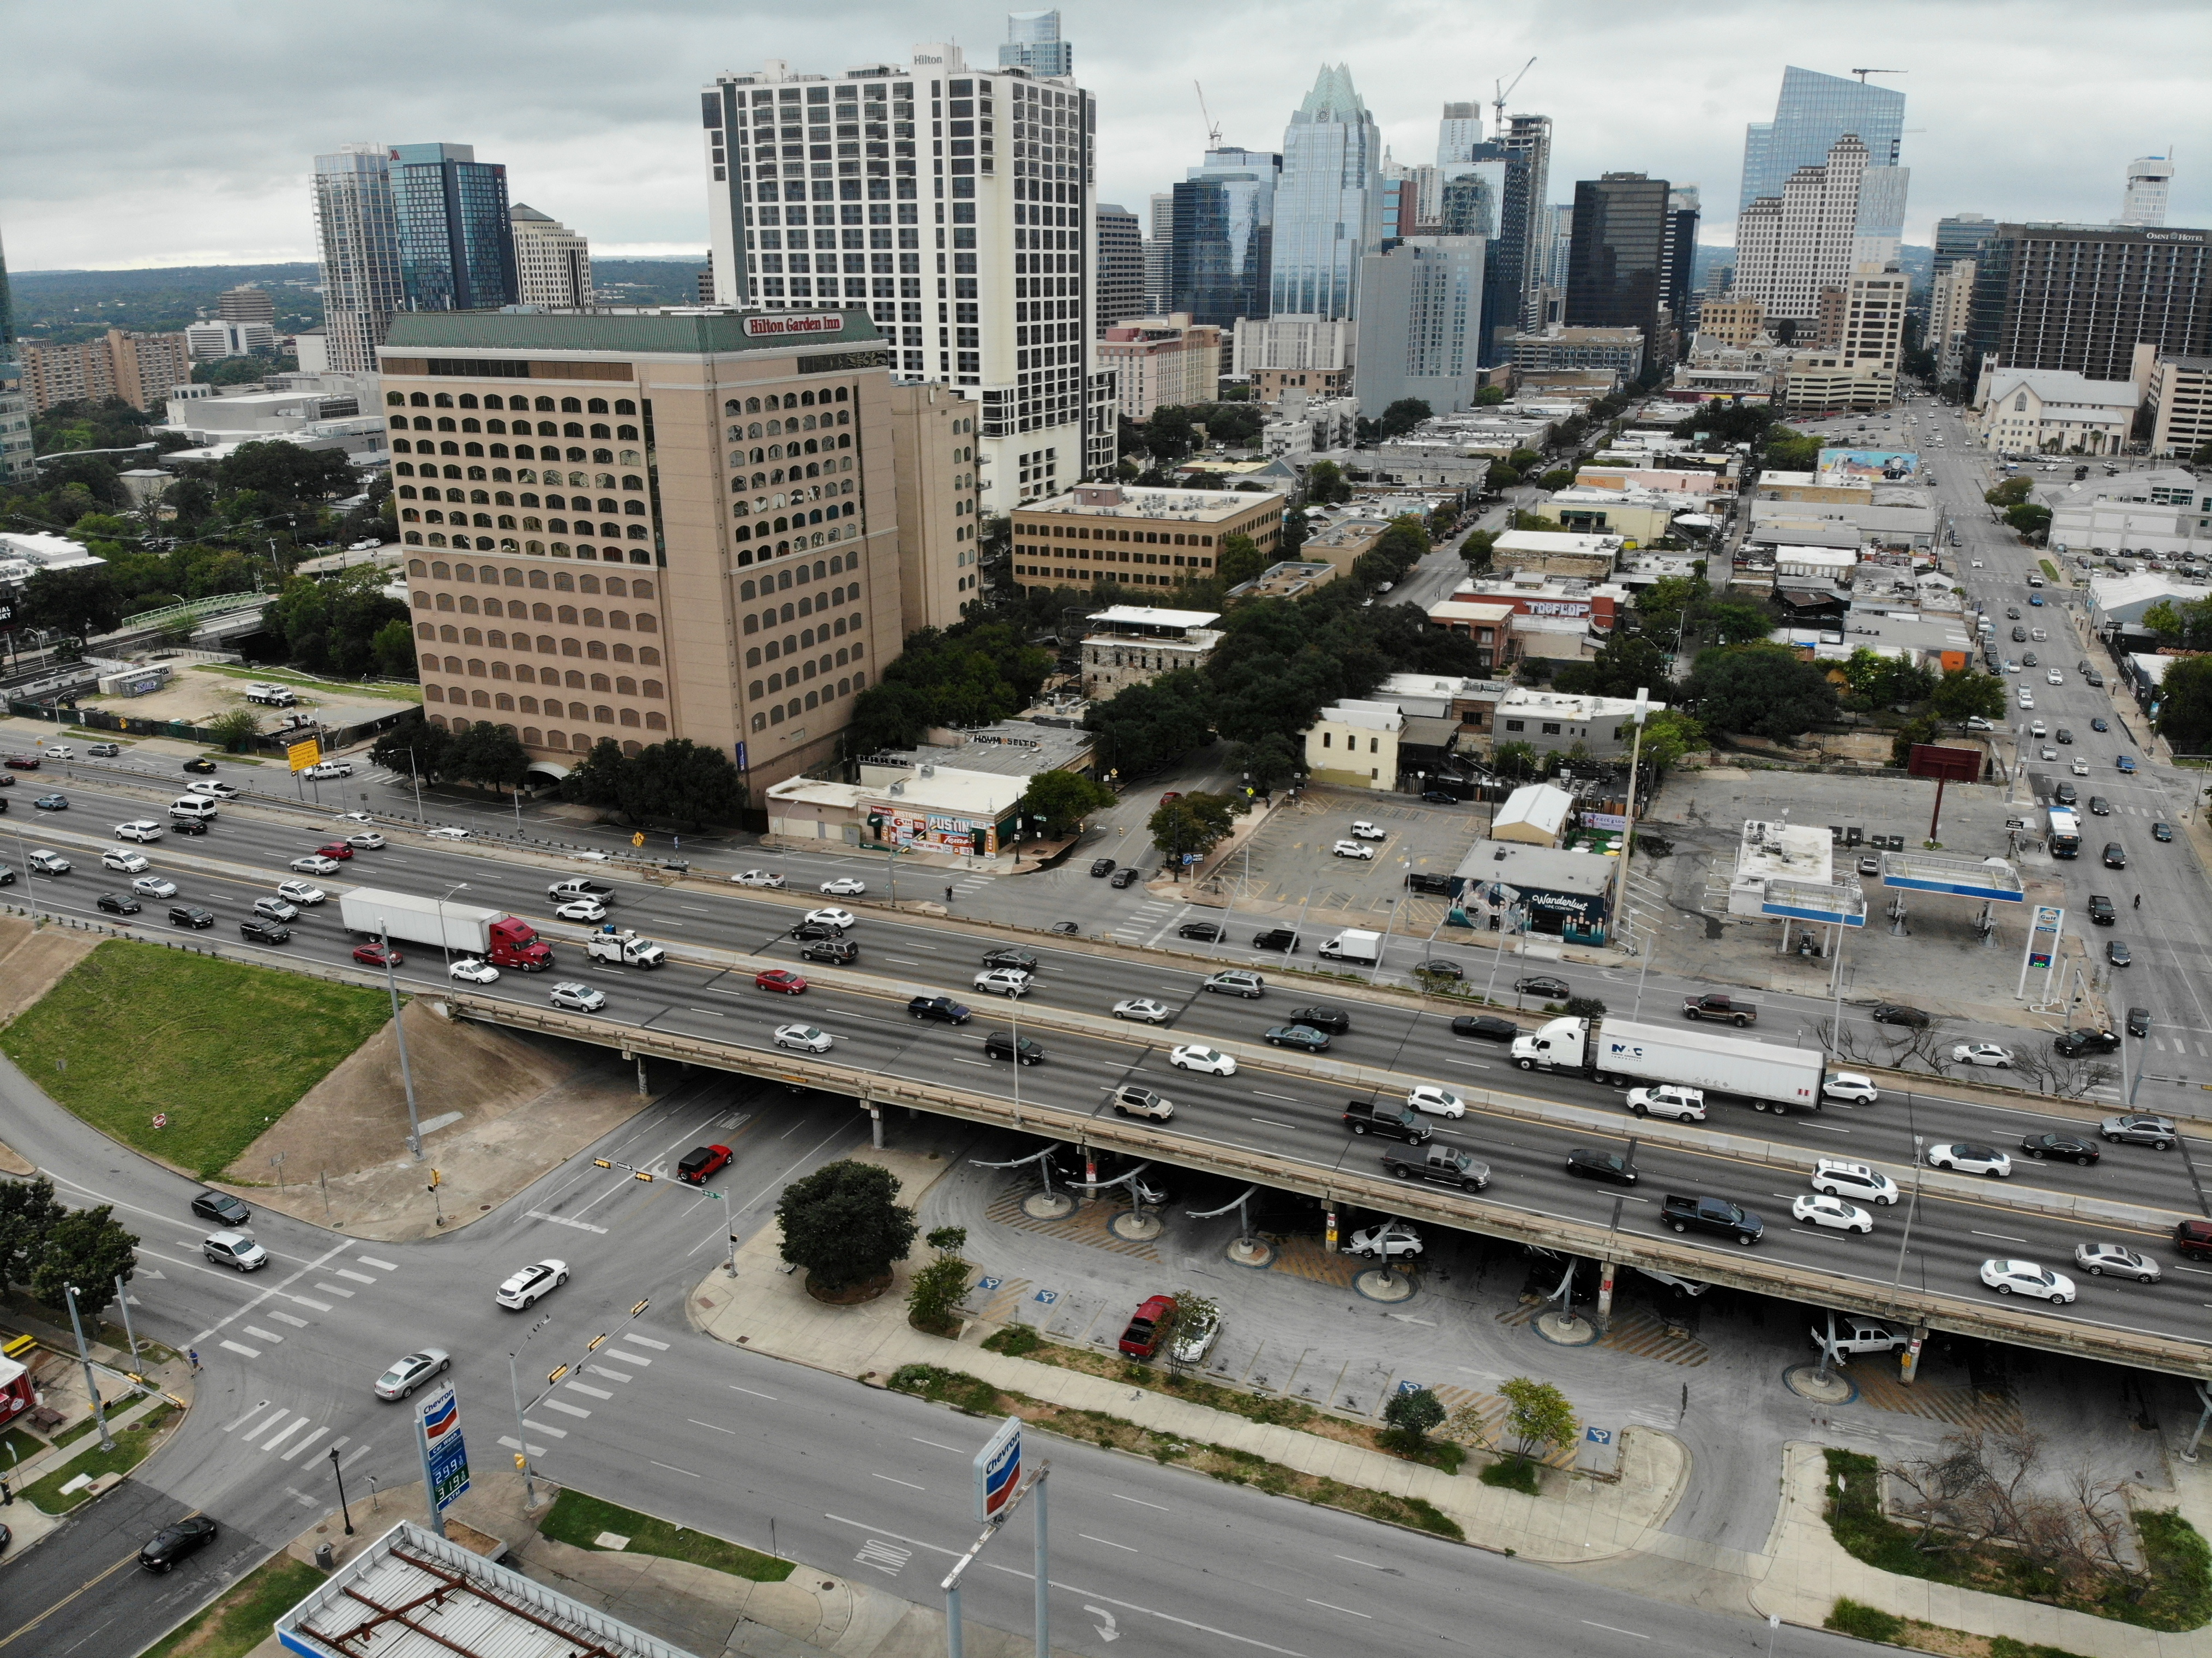 Aerial image of downtown Austin and a portion of Interstate 35